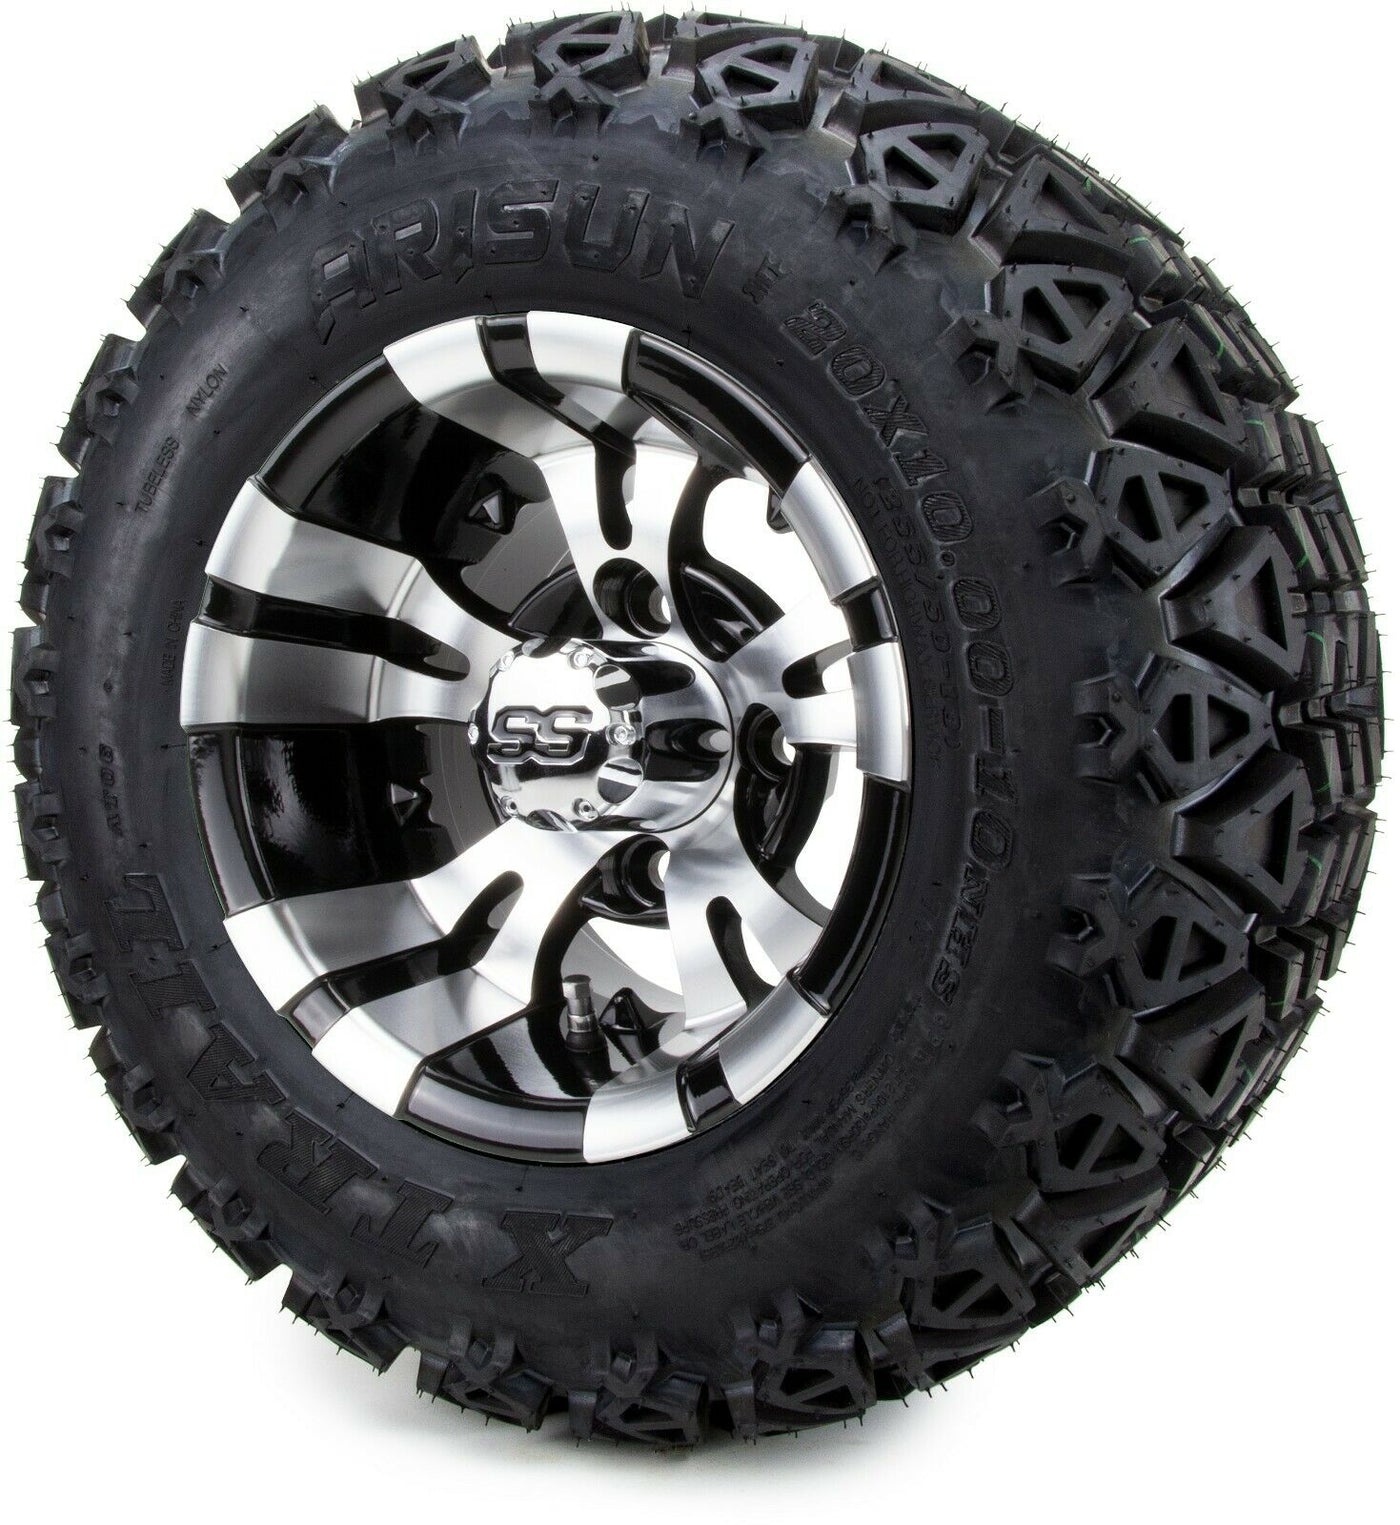 10" VAMPIRE MACHINED/BLACK - 18x9.00-10 All-Terrain TIRES AND WHEELS COMBO (SET OF 4)